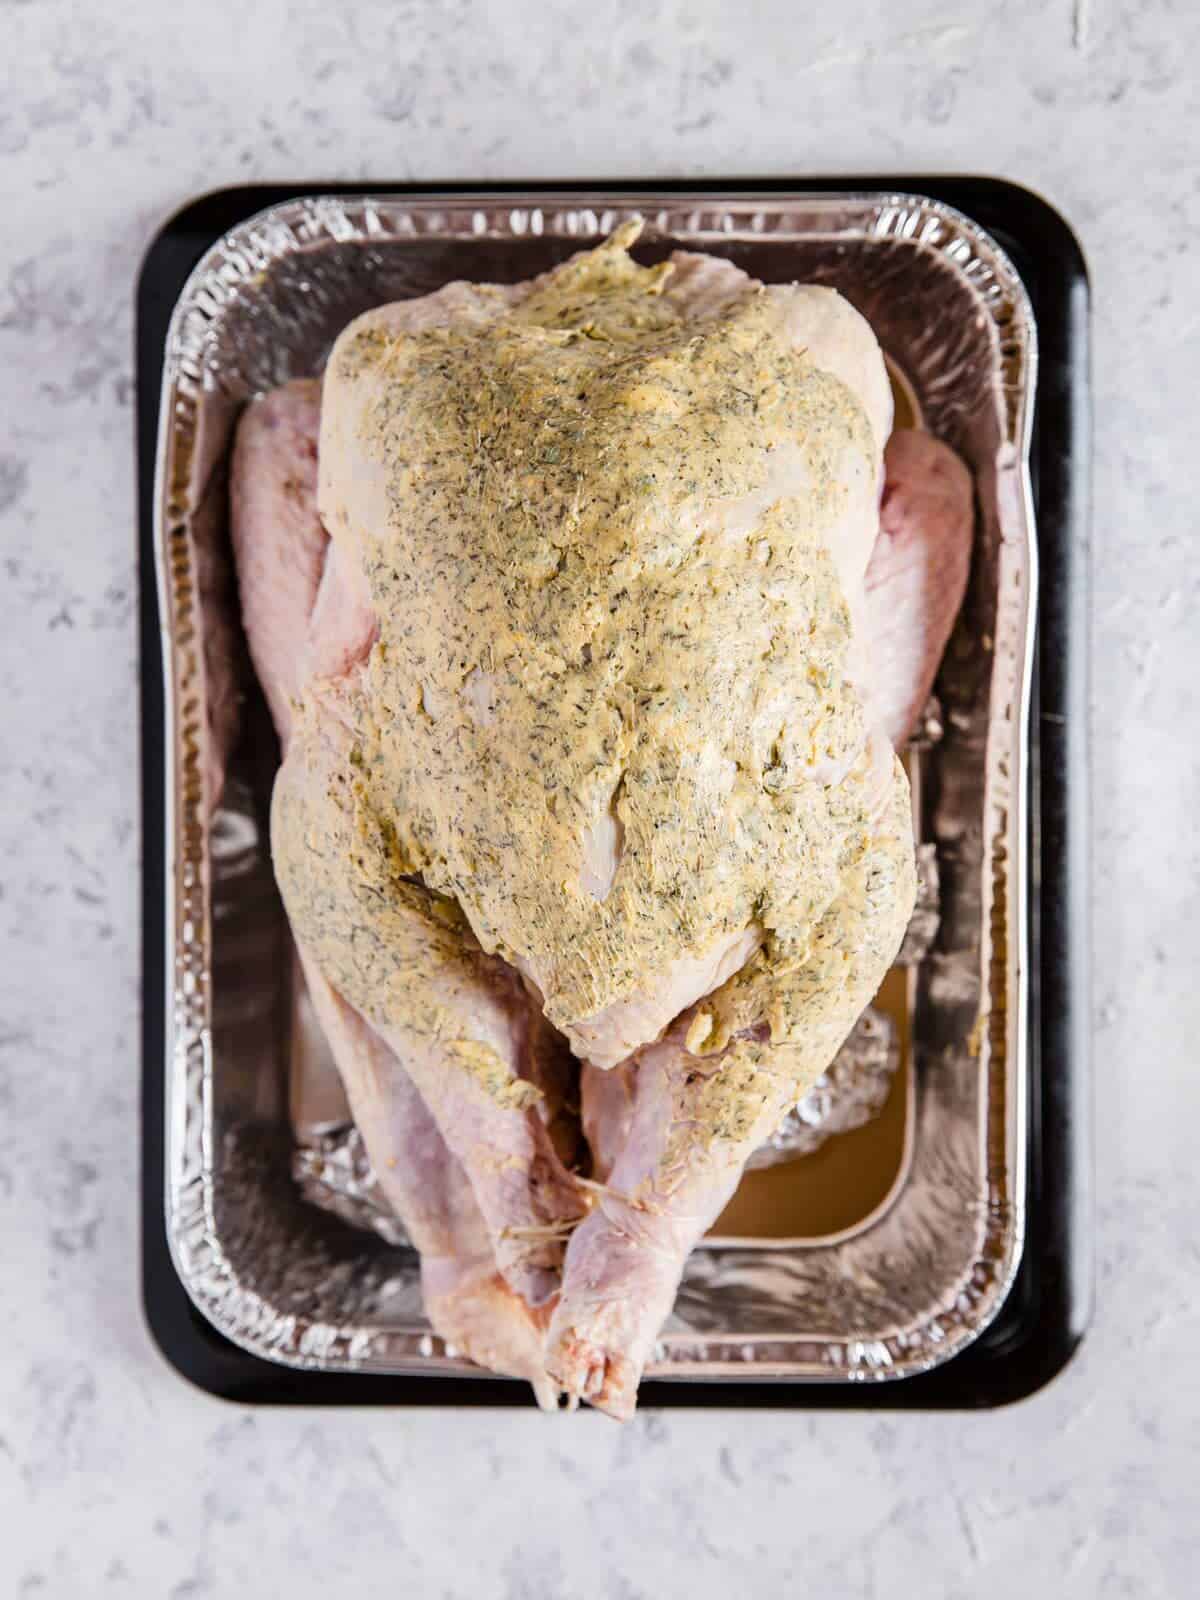 An aluminum roasting pan with a raw turkey in it that is covered with compound butter.